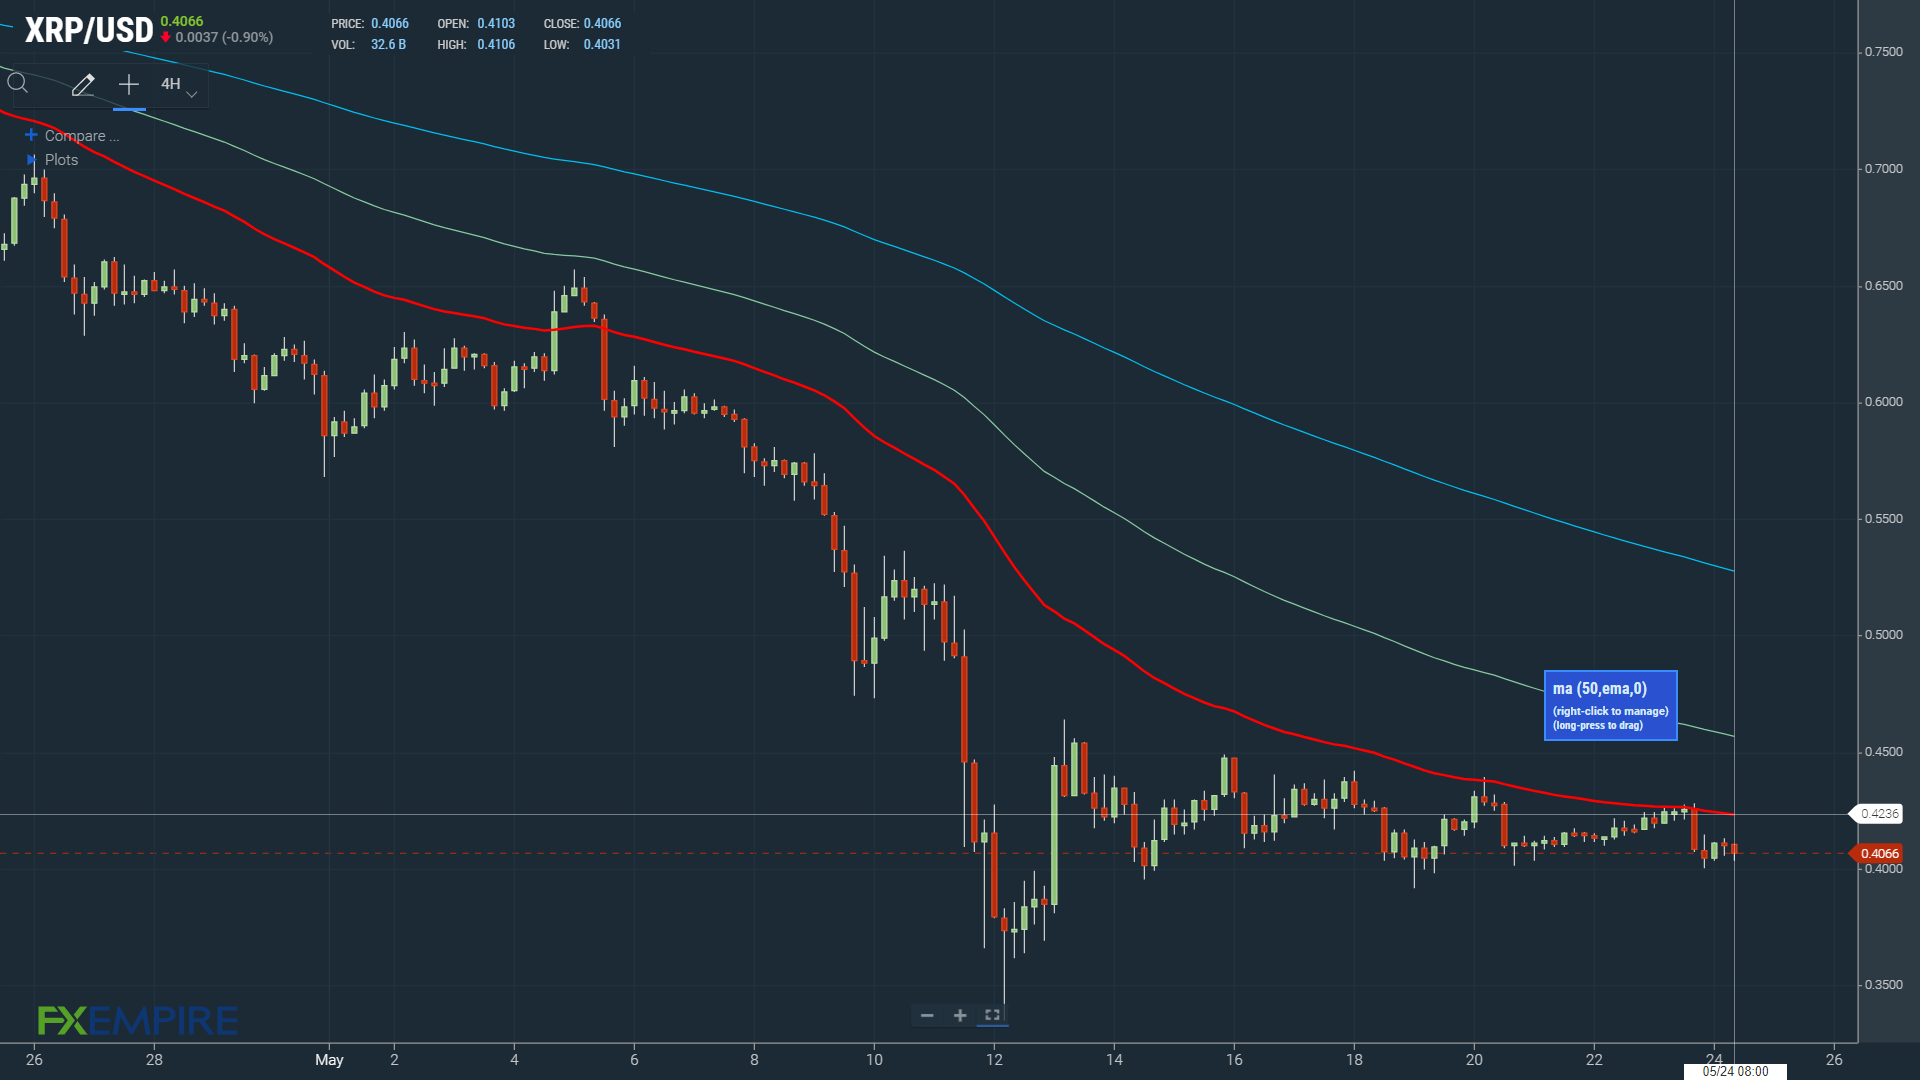 An XRP move through the 50-day EMA would support run at $0.45.